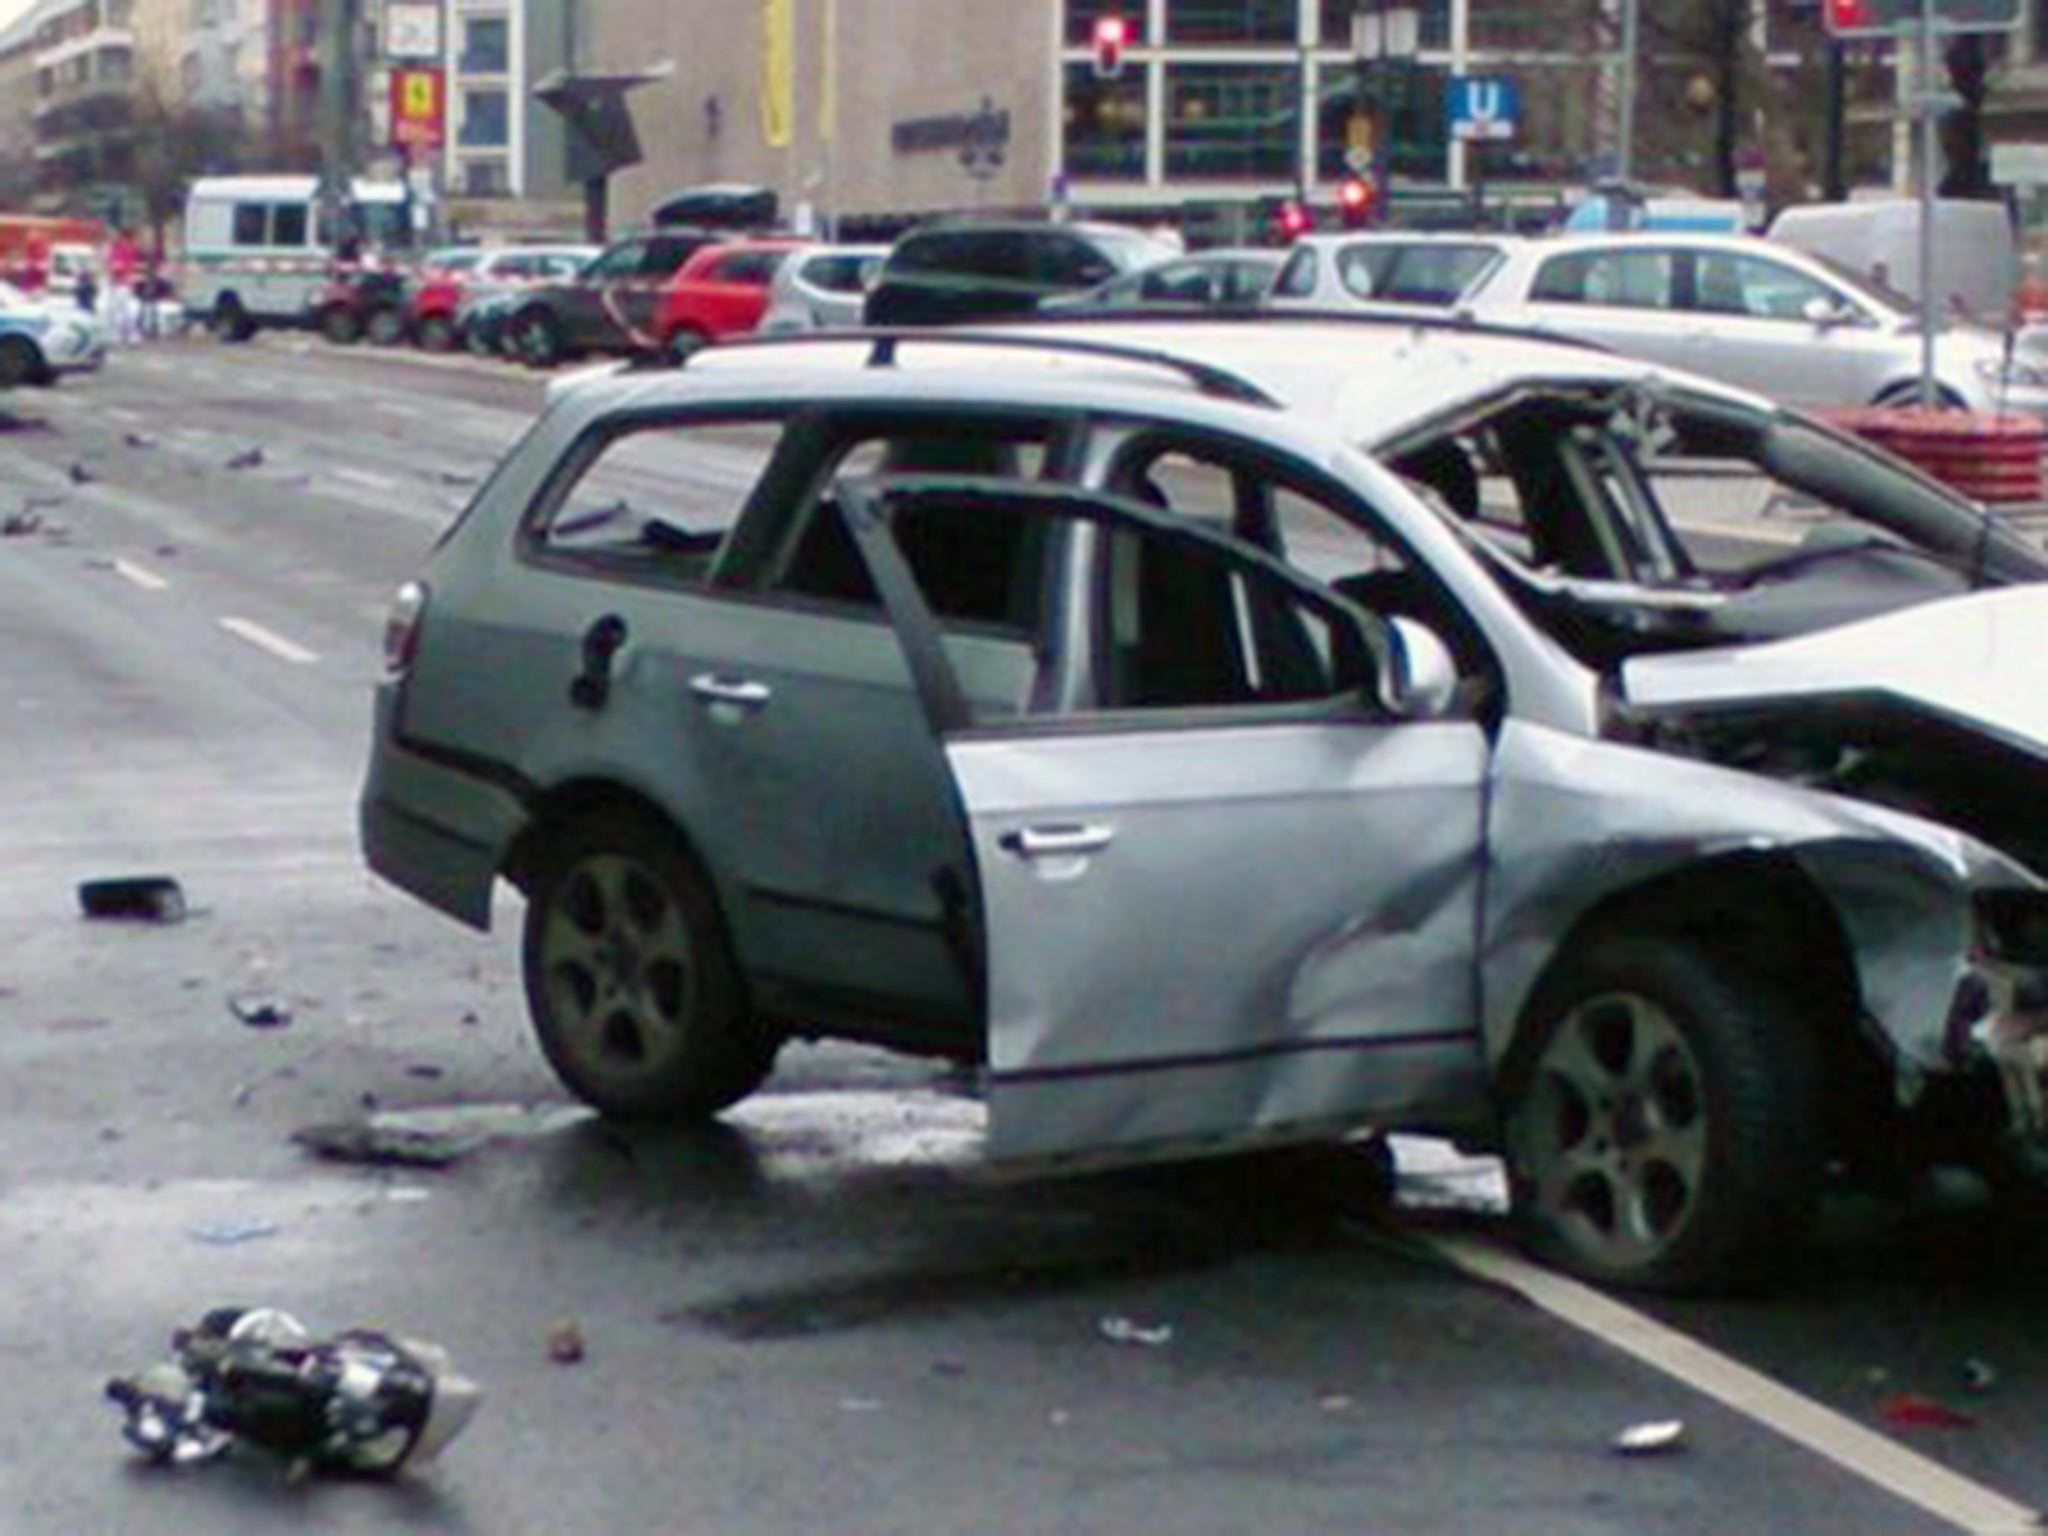 Berlin Police uploaded a picture of the wreckage of a silver VW Passat with its windows blown out and its front end smashed in